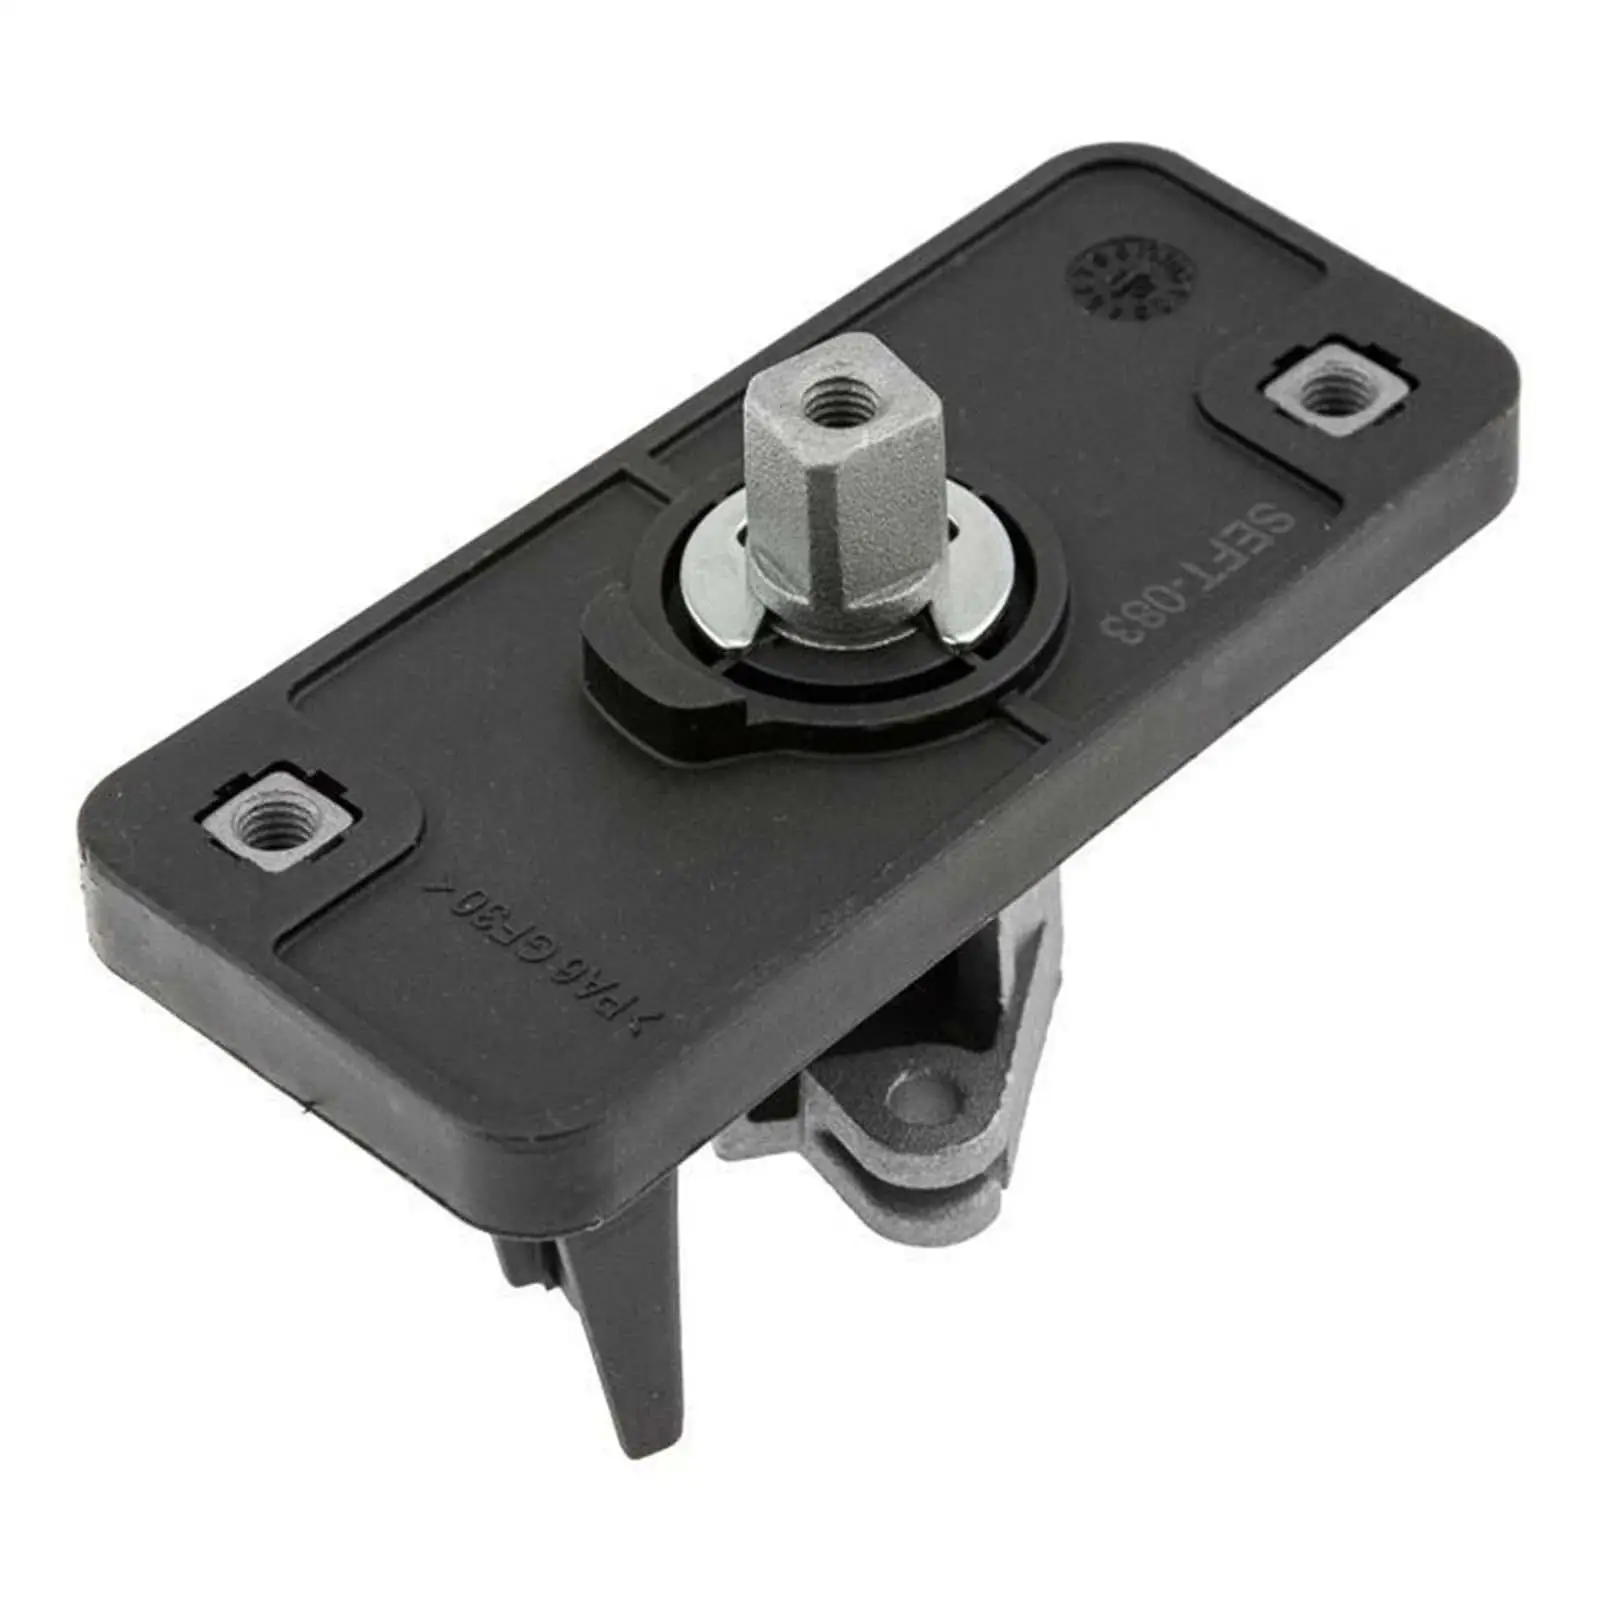 Replacement Rear Door Lock 1356490080 Sturdy Simple Installation Good Performance Professional Vehicle Repair Parts Replaces